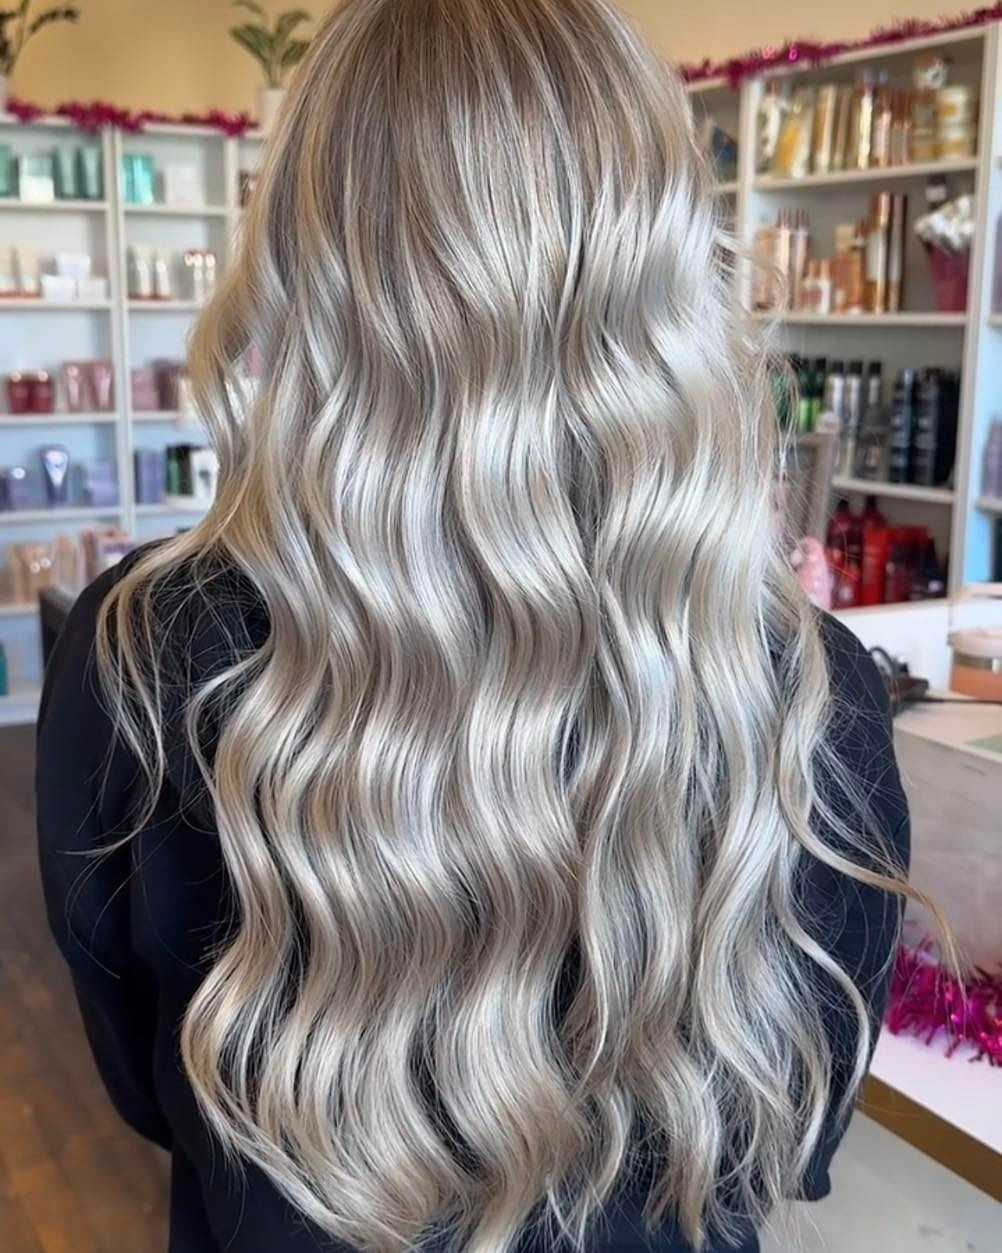 Long, wavy platinum blonde hair styled in loose curls, showcased in a bright salon setting.